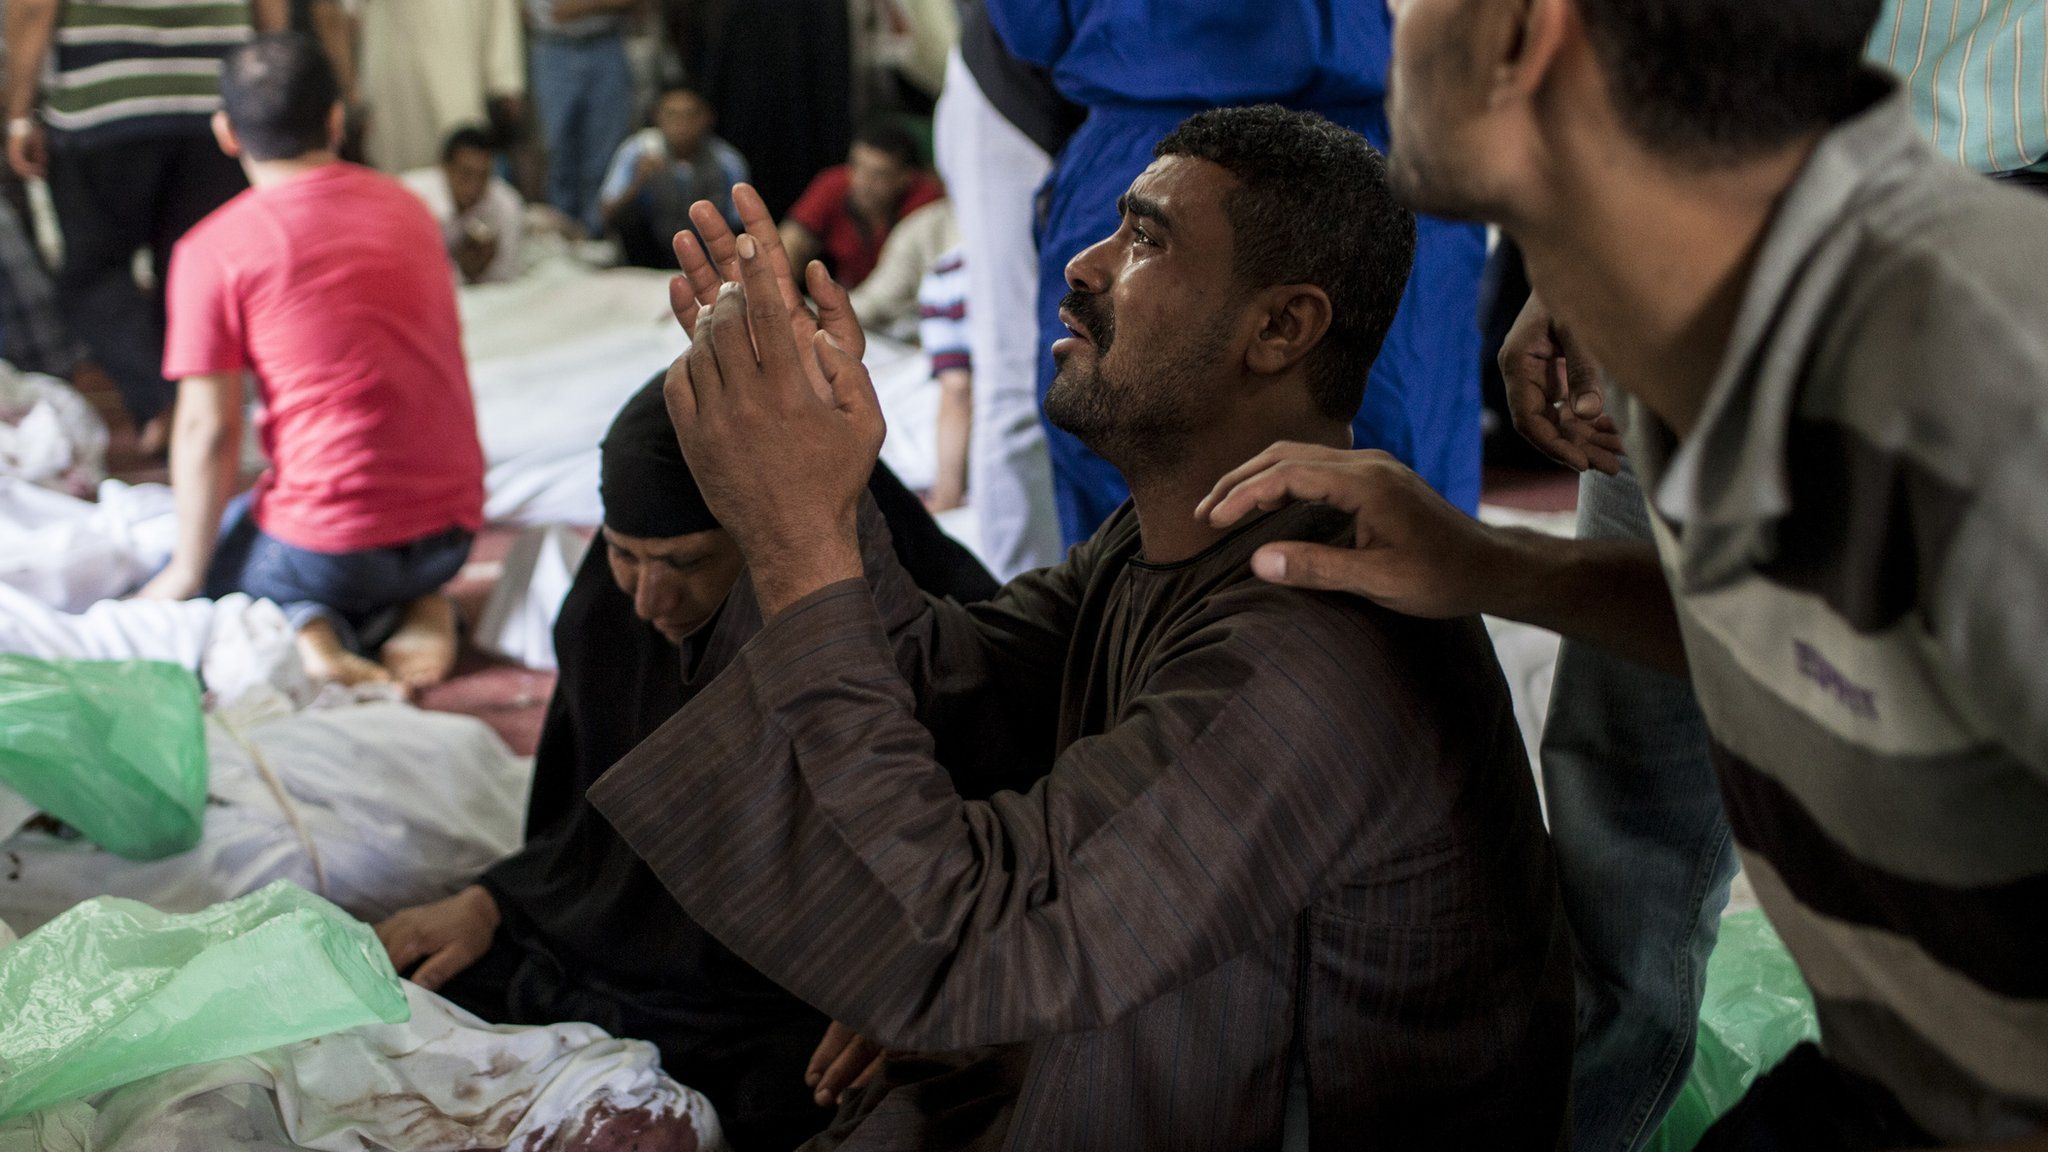 An Egyptian man identifies the body of a family member killed during a crackdown by Egyptian security forces in Cairo, Egypt (15 August 2013)